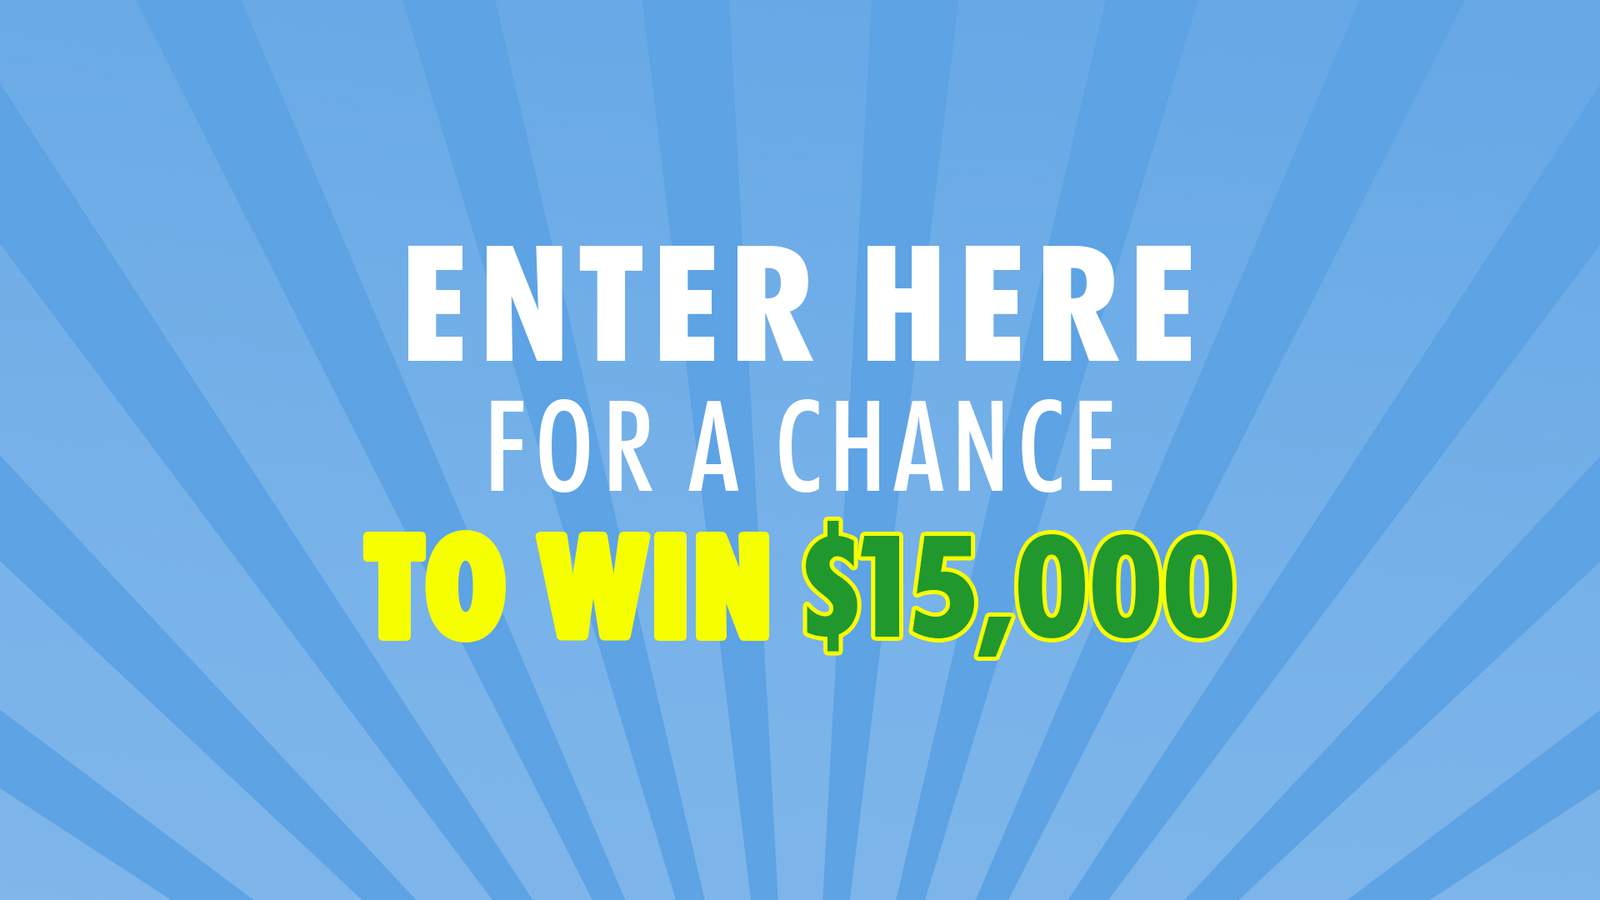 Enter to win $15,000 in a National Sweepstakes